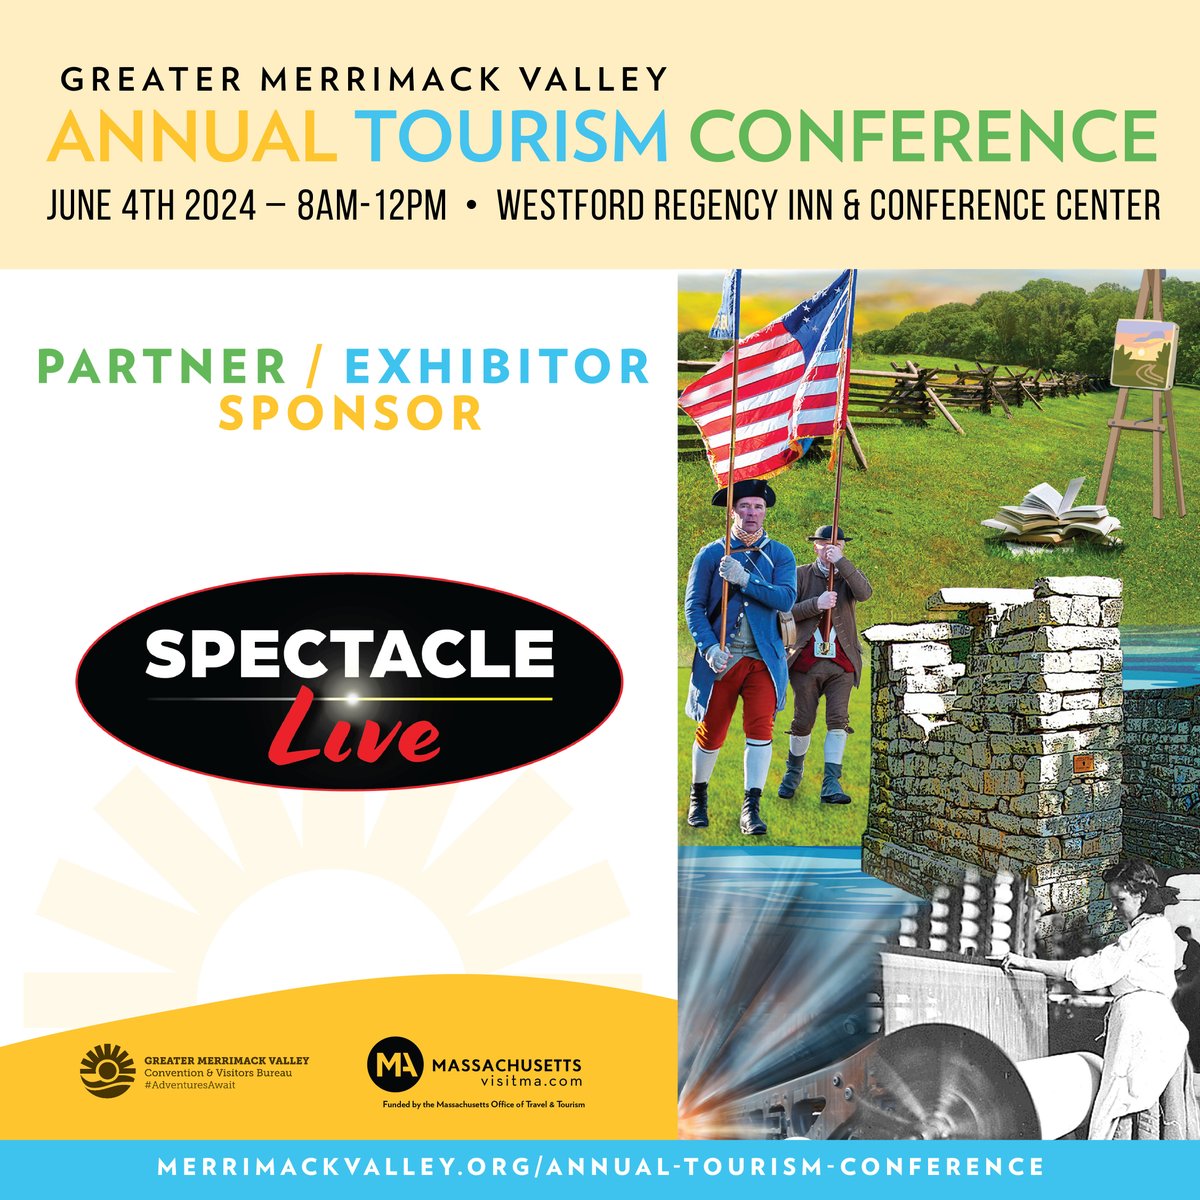 🎉 A huge THANK YOU to @SpectacleShows for sponsoring the 2024 Annual Tourism Conference! 🌟Join us on Tuesday, June 4th from 8AM – 12PM at the Westford Regency Inn & Conference Center. Let's explore the future of tourism together#SpectacleLive #MerrimackValley #Tourism